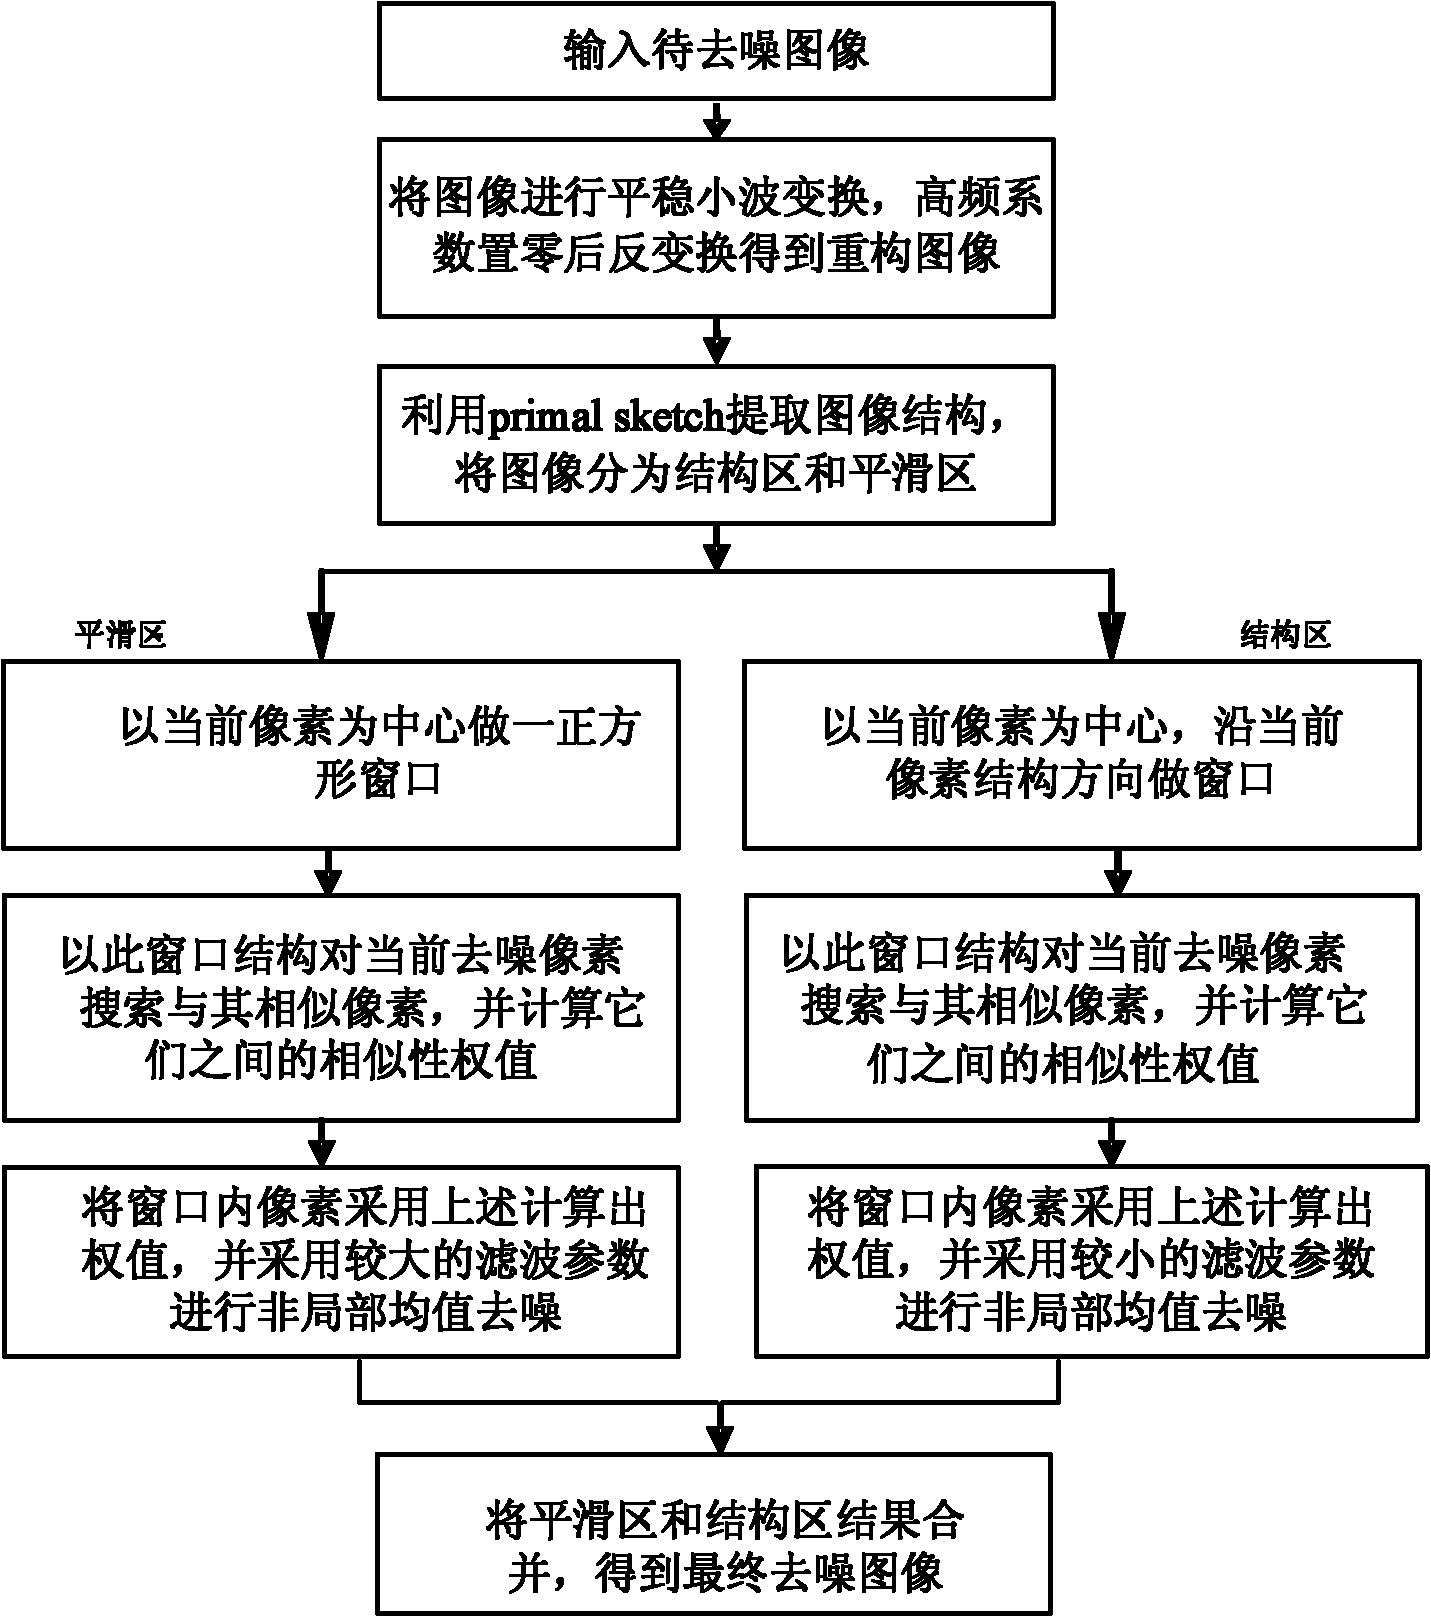 Non-local mean image denoising method combined with structure information